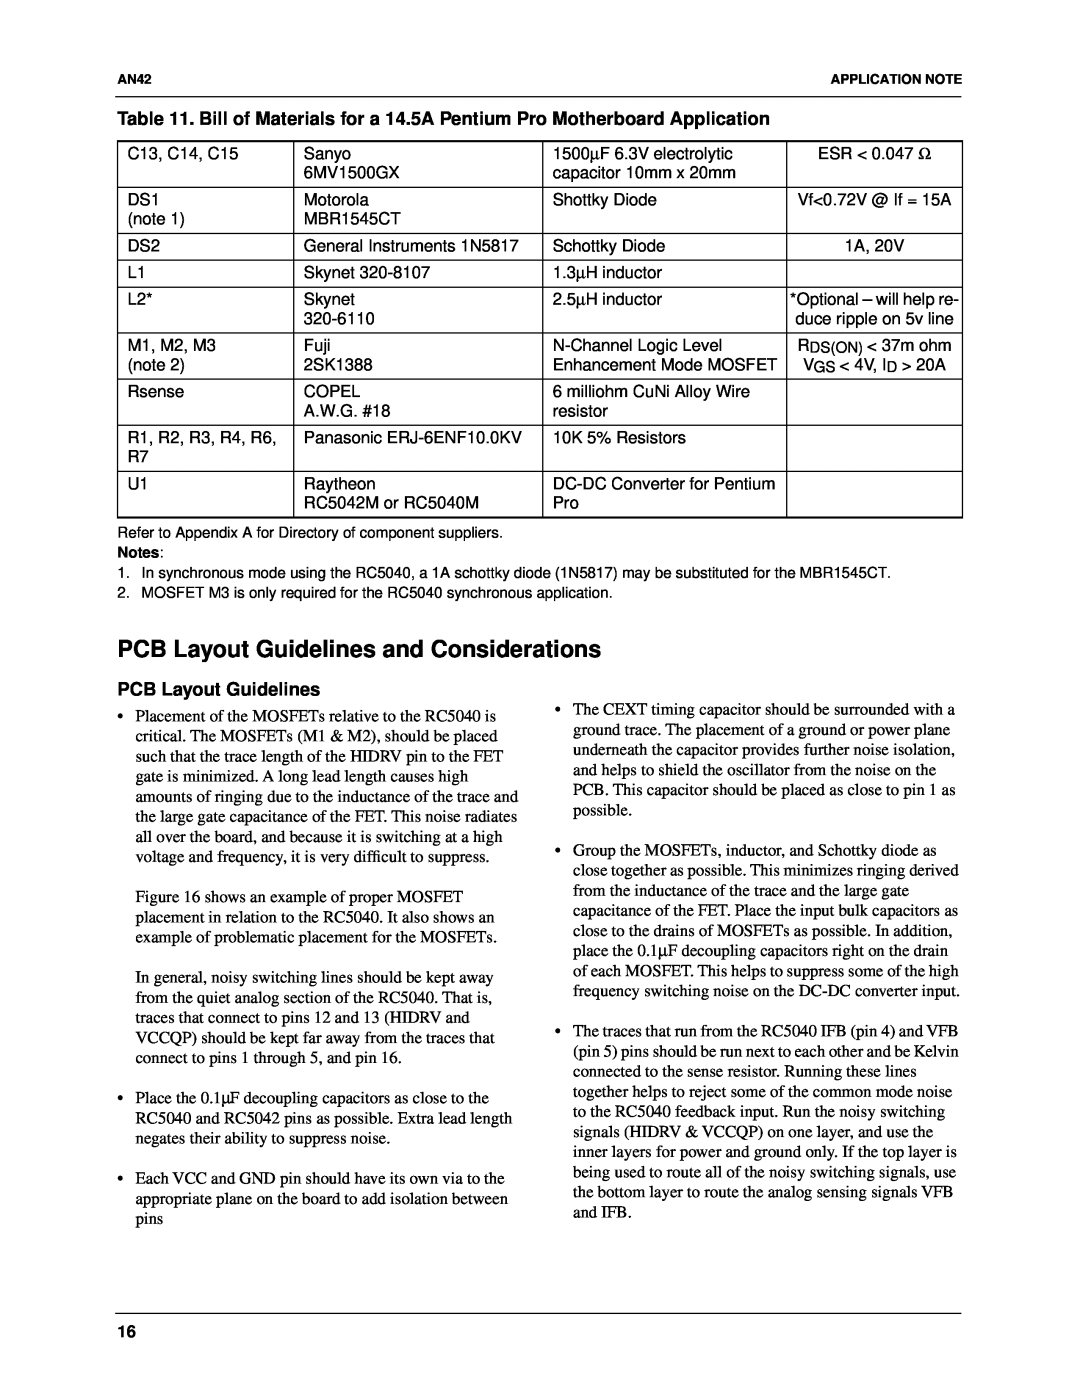 Fairchild RC5042 PCB Layout Guidelines and Considerations, Vf0.72V @ If = 15A, Optional - will help re, VGS 4V, ID 20A 